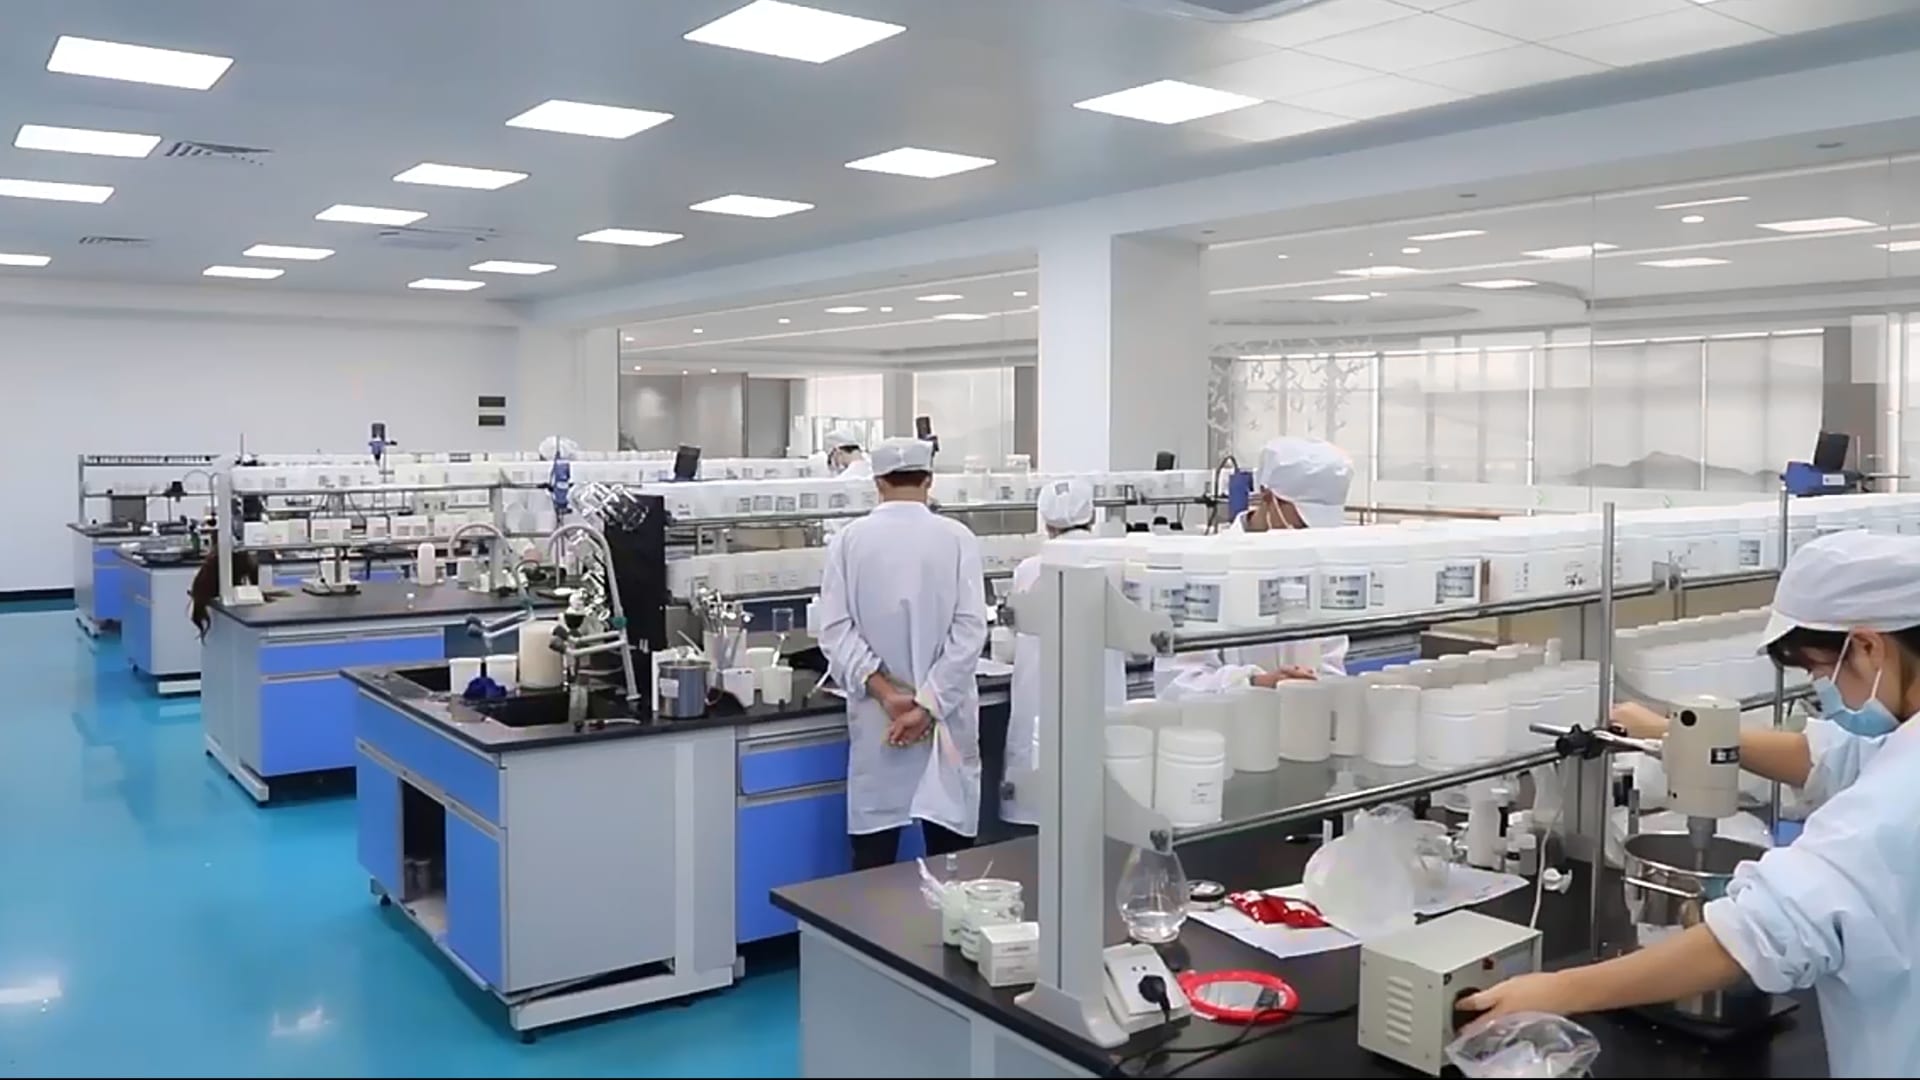 We employ advanced technologies like liquid microfiltration, vacuum emulsification, and supercritical fluid extraction to produce premium cosmetic formulas. Our R&D team works closely with world-leading suppliers to develop innovative ingredients and formulations unique to our brand. We have a high-tech R&D team and mature formula. Covering an area of more than 500 square meters .6,000 mature formulas in our R&D center.